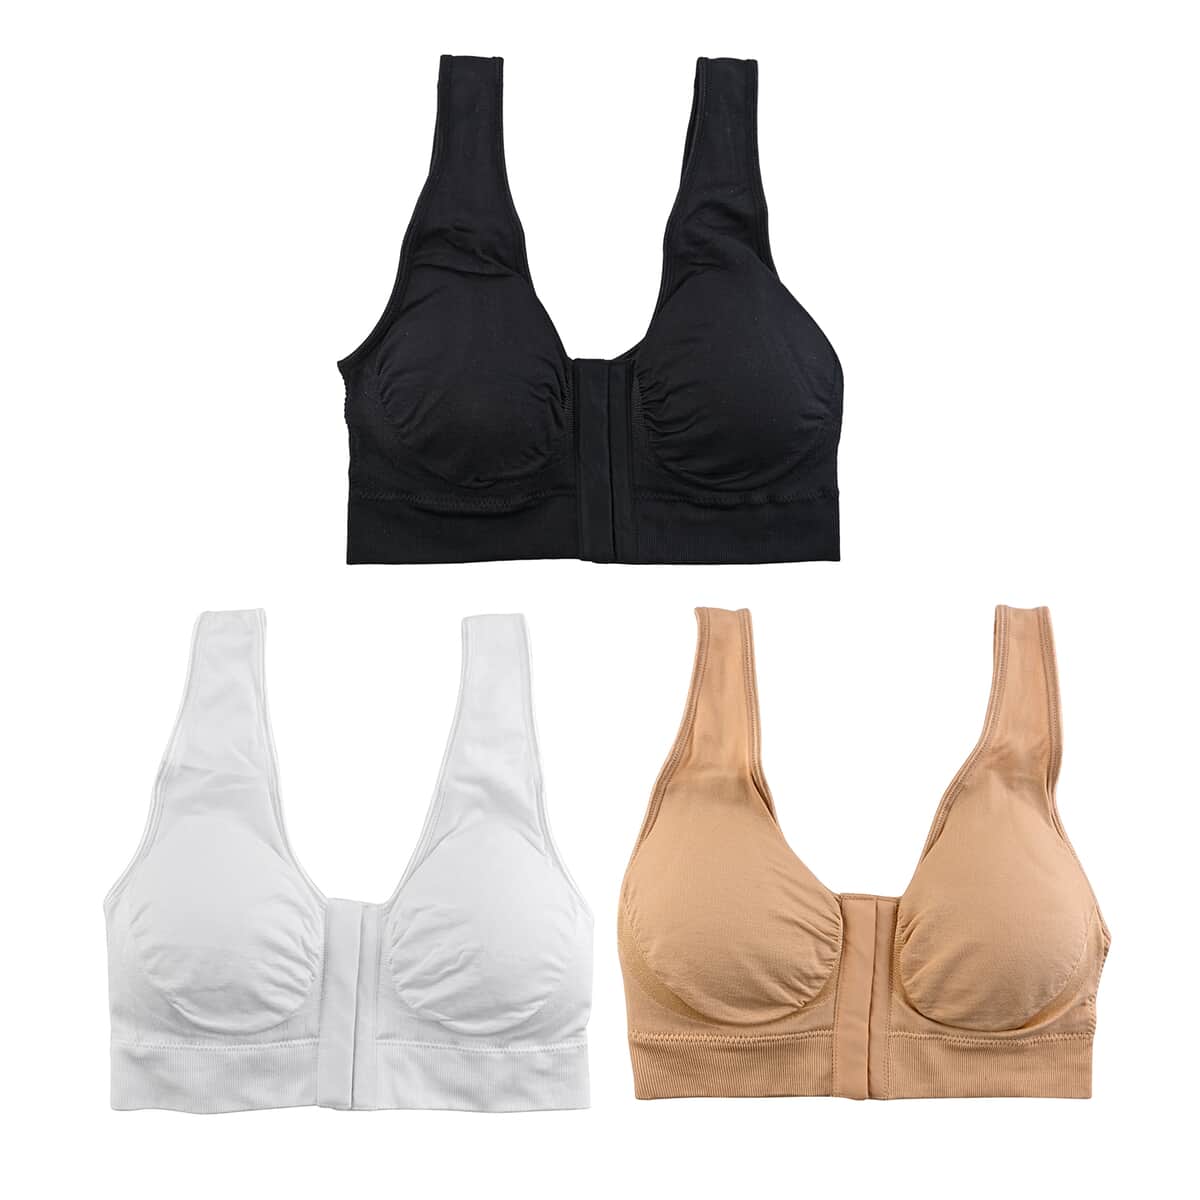 Miracle Bamboo Beyond Comfort Bra Set of 3 Front Closure Bras - Black, Beige and White - Size L image number 0